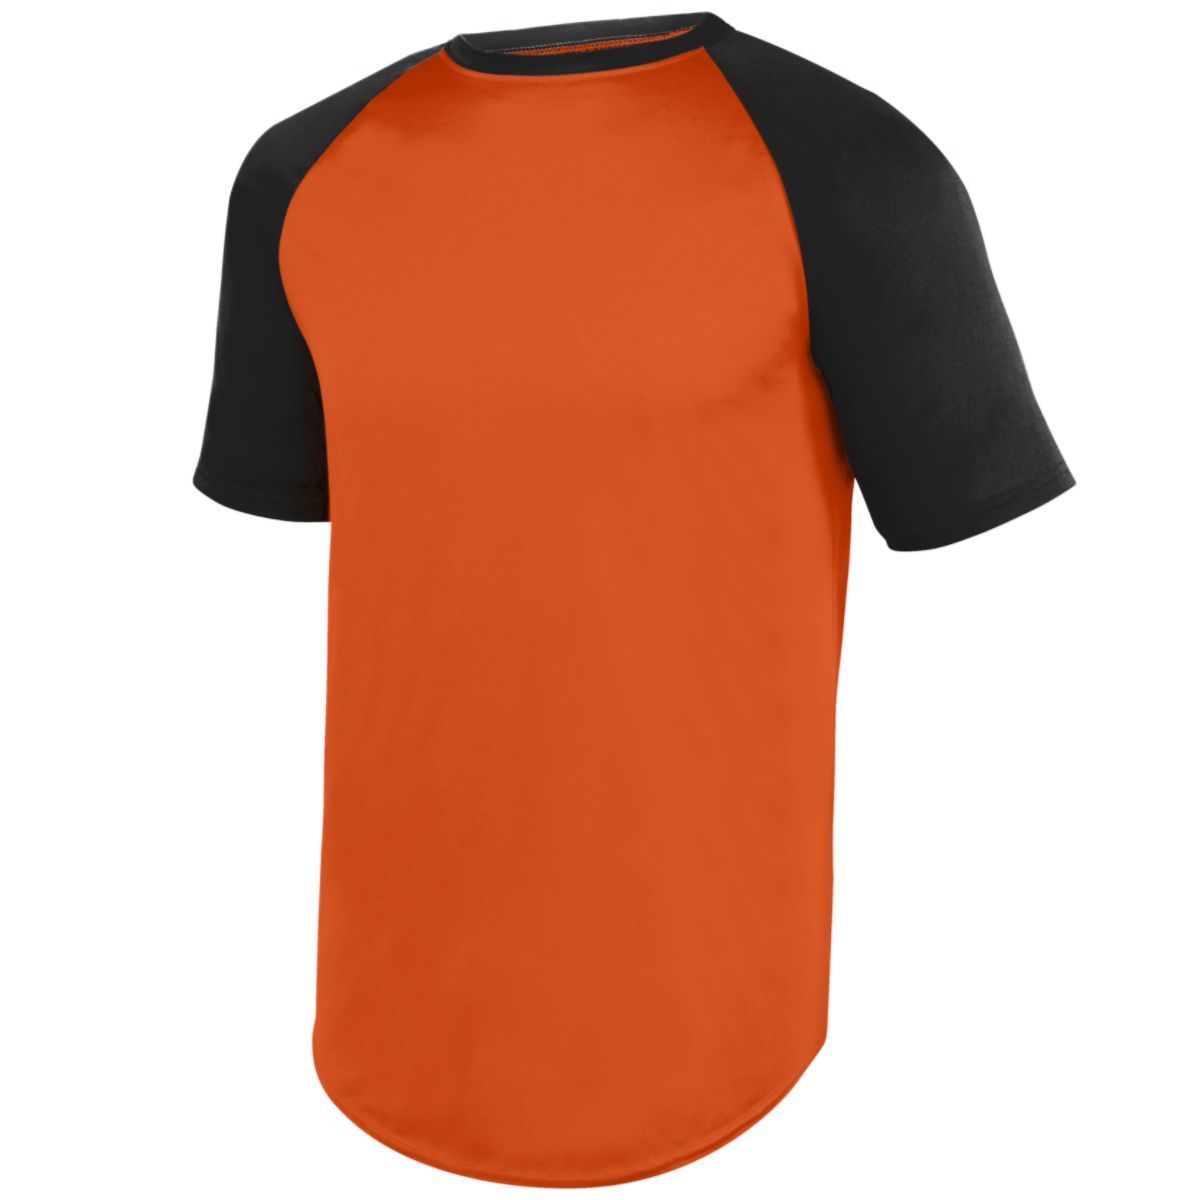 Augusta Sportswear Wicking Short Sleeve Baseball Jersey in Orange/Black  -Part of the Adult, Adult-Jersey, Augusta-Products, Baseball, Shirts, All-Sports, All-Sports-1 product lines at KanaleyCreations.com